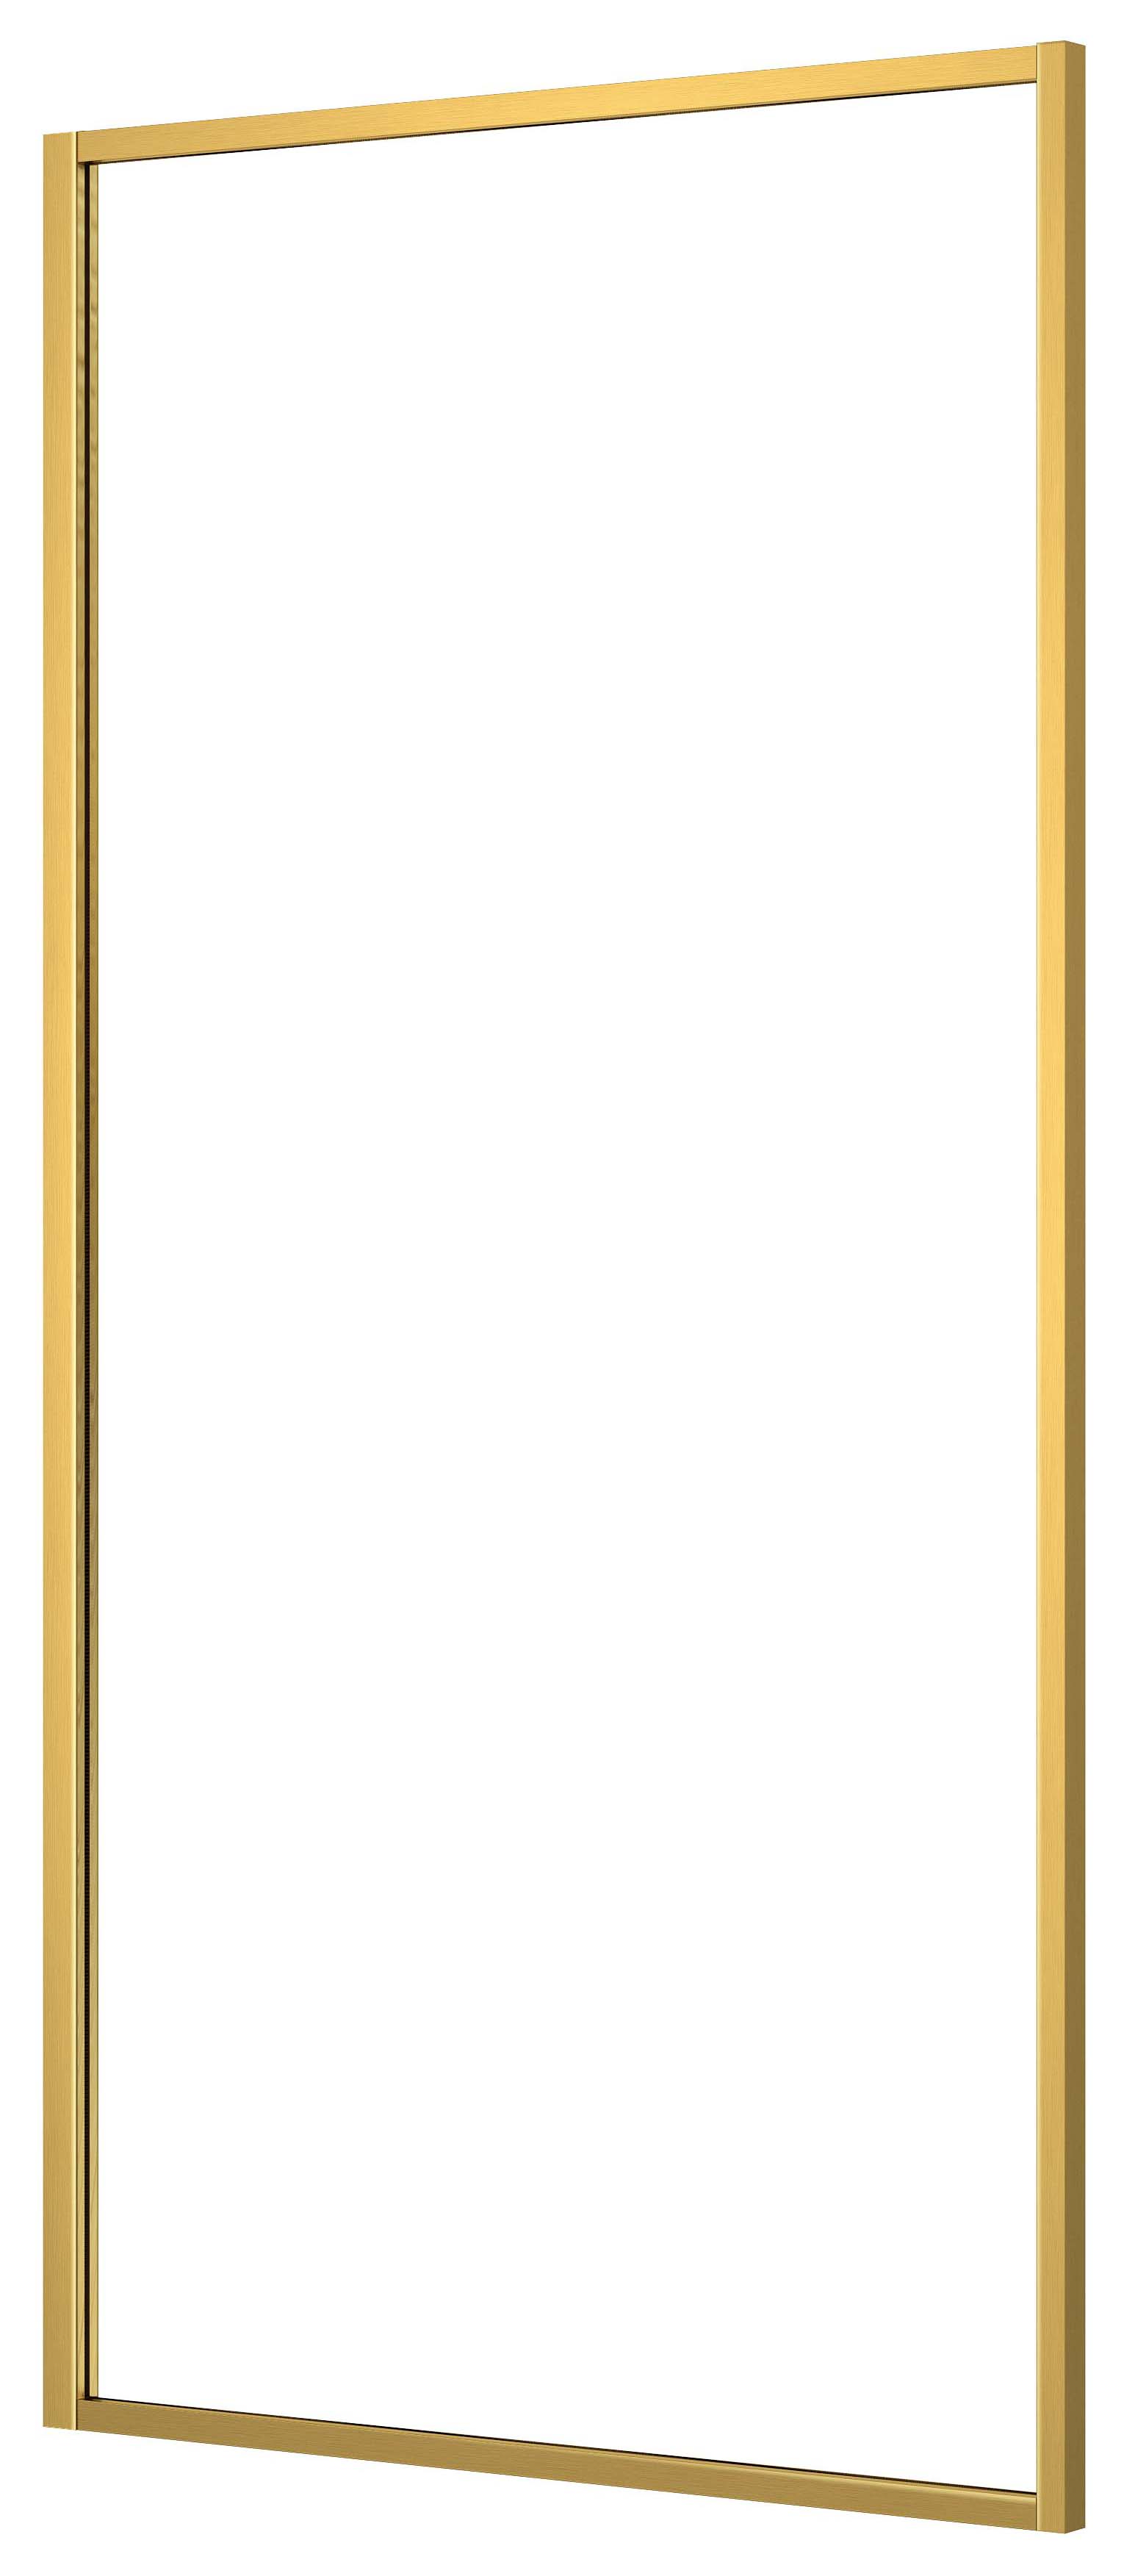 Nexa By Merlyn 8mm Brushed Brass Framed Fixed Square Panel Bath Screen - 1500 x 800mm